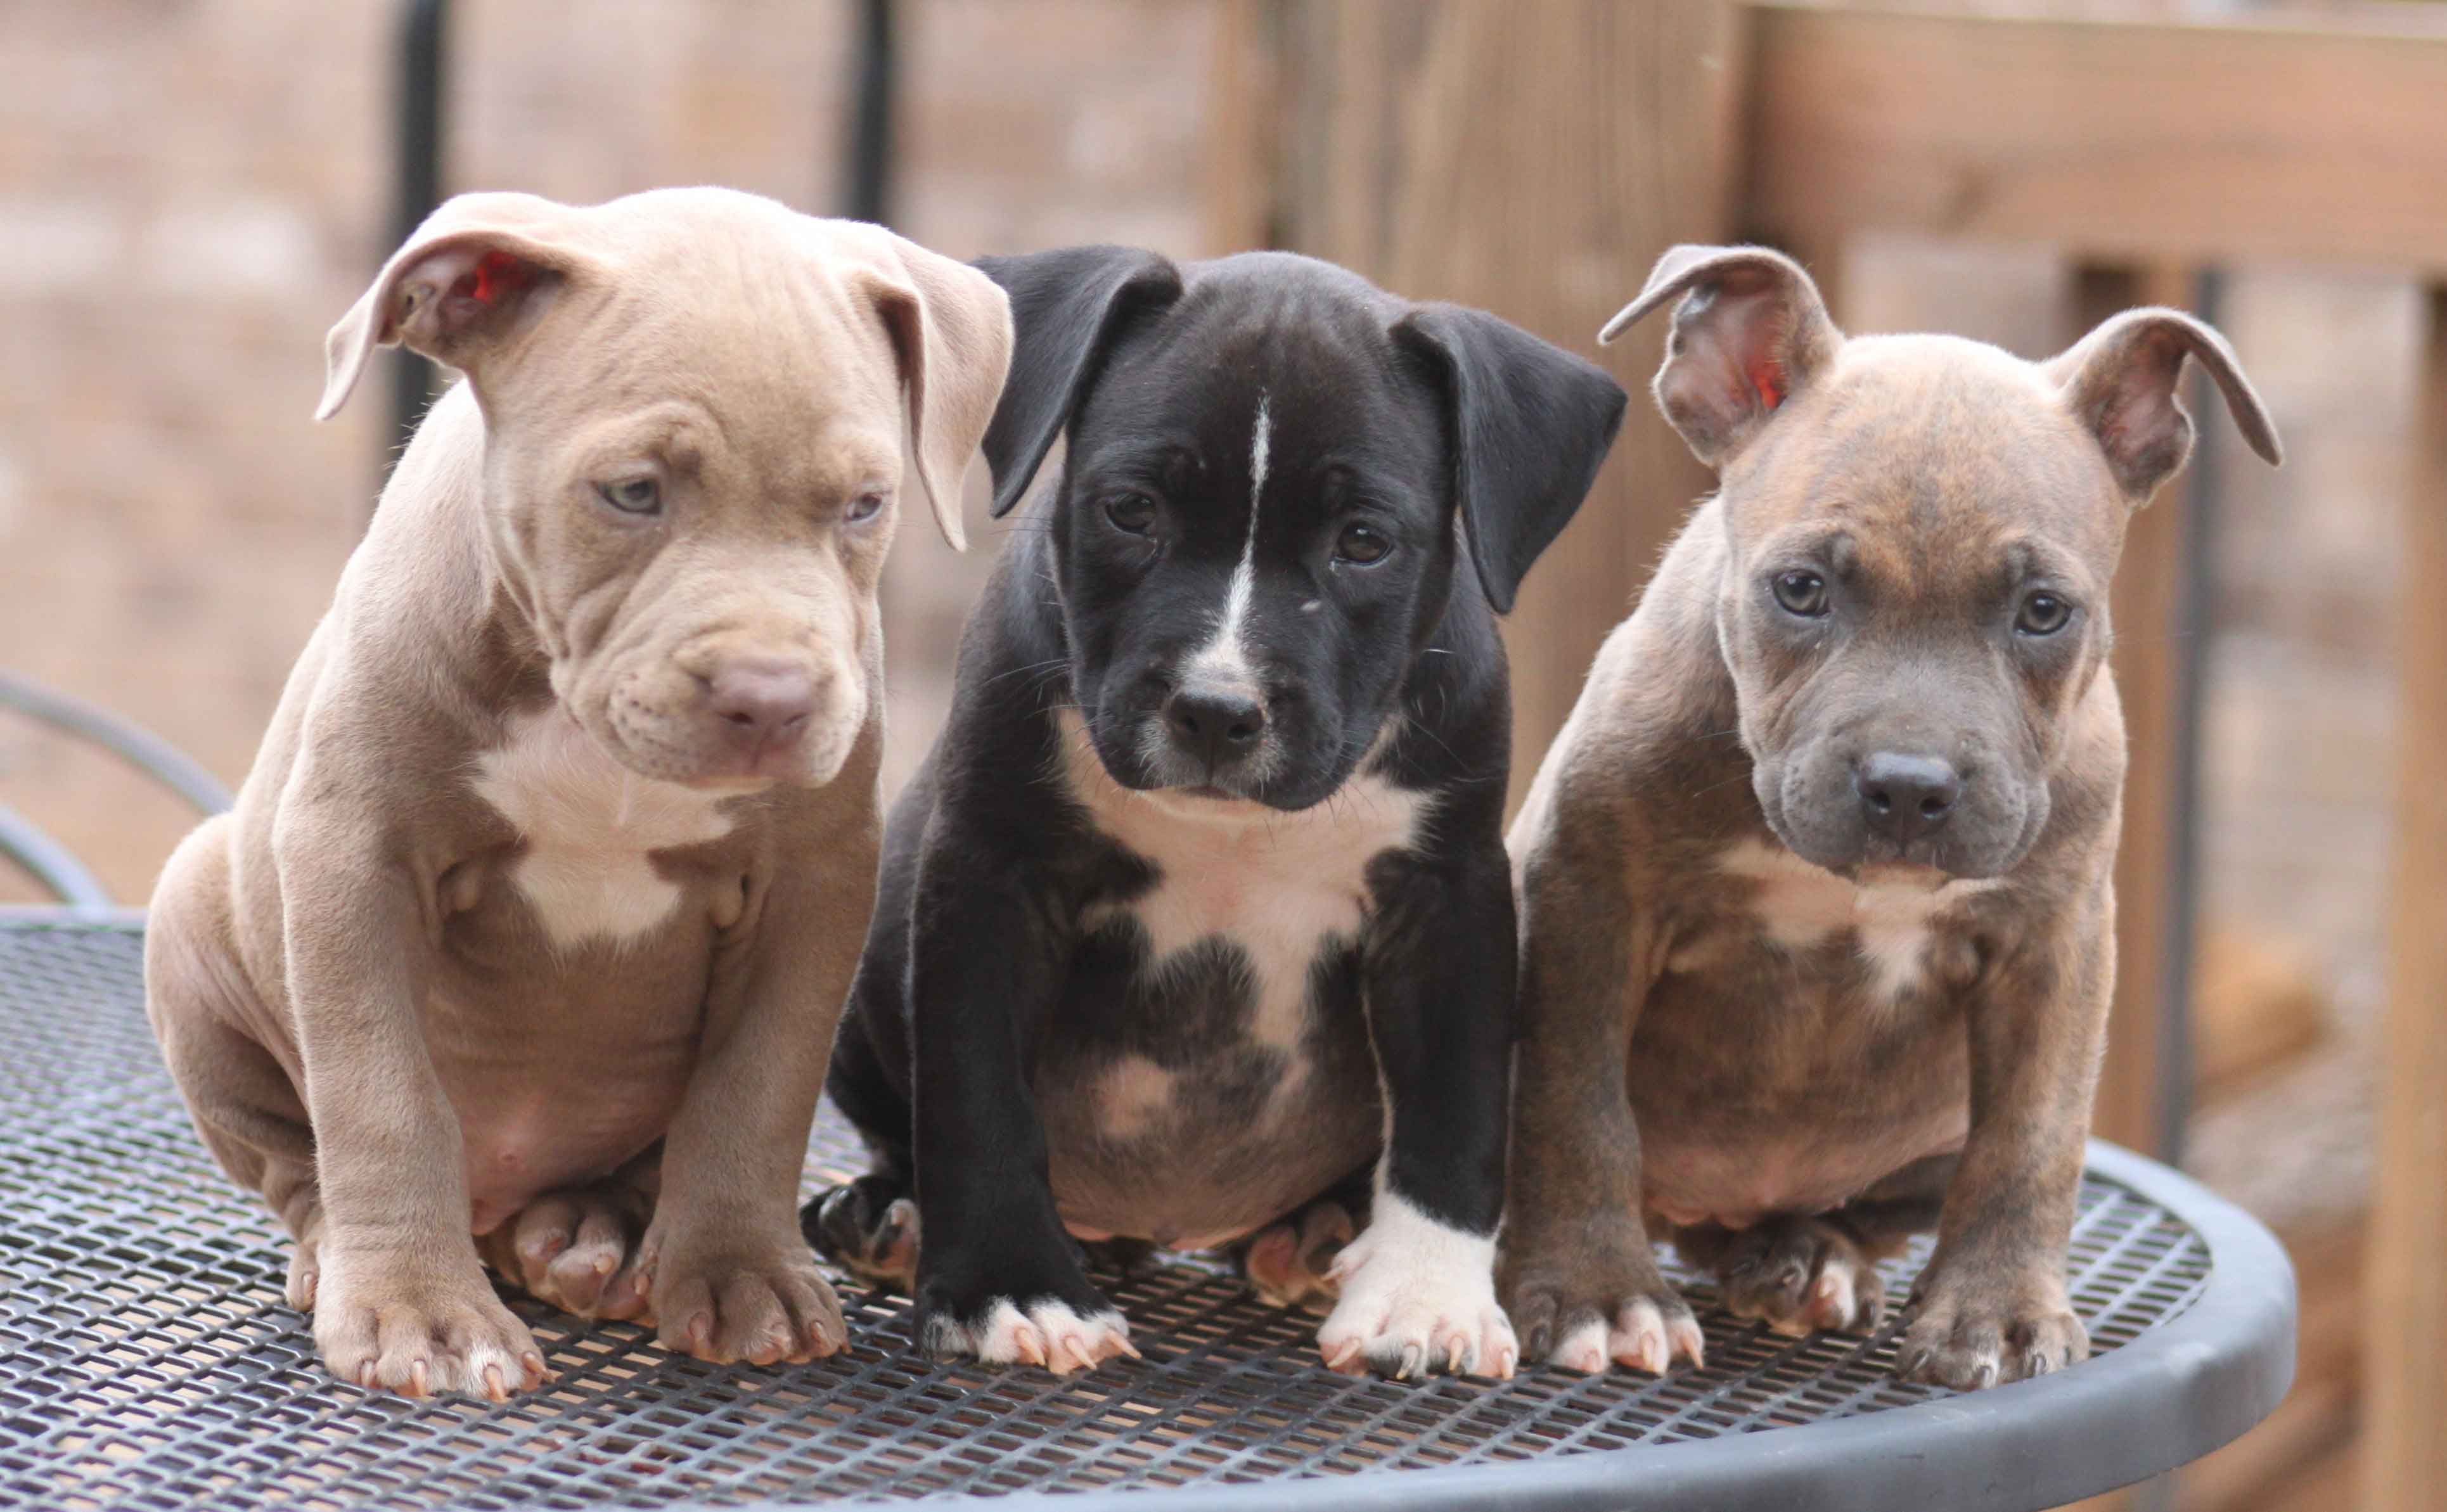 Cute Pitbull Puppies Wallpapers on WallpaperDog